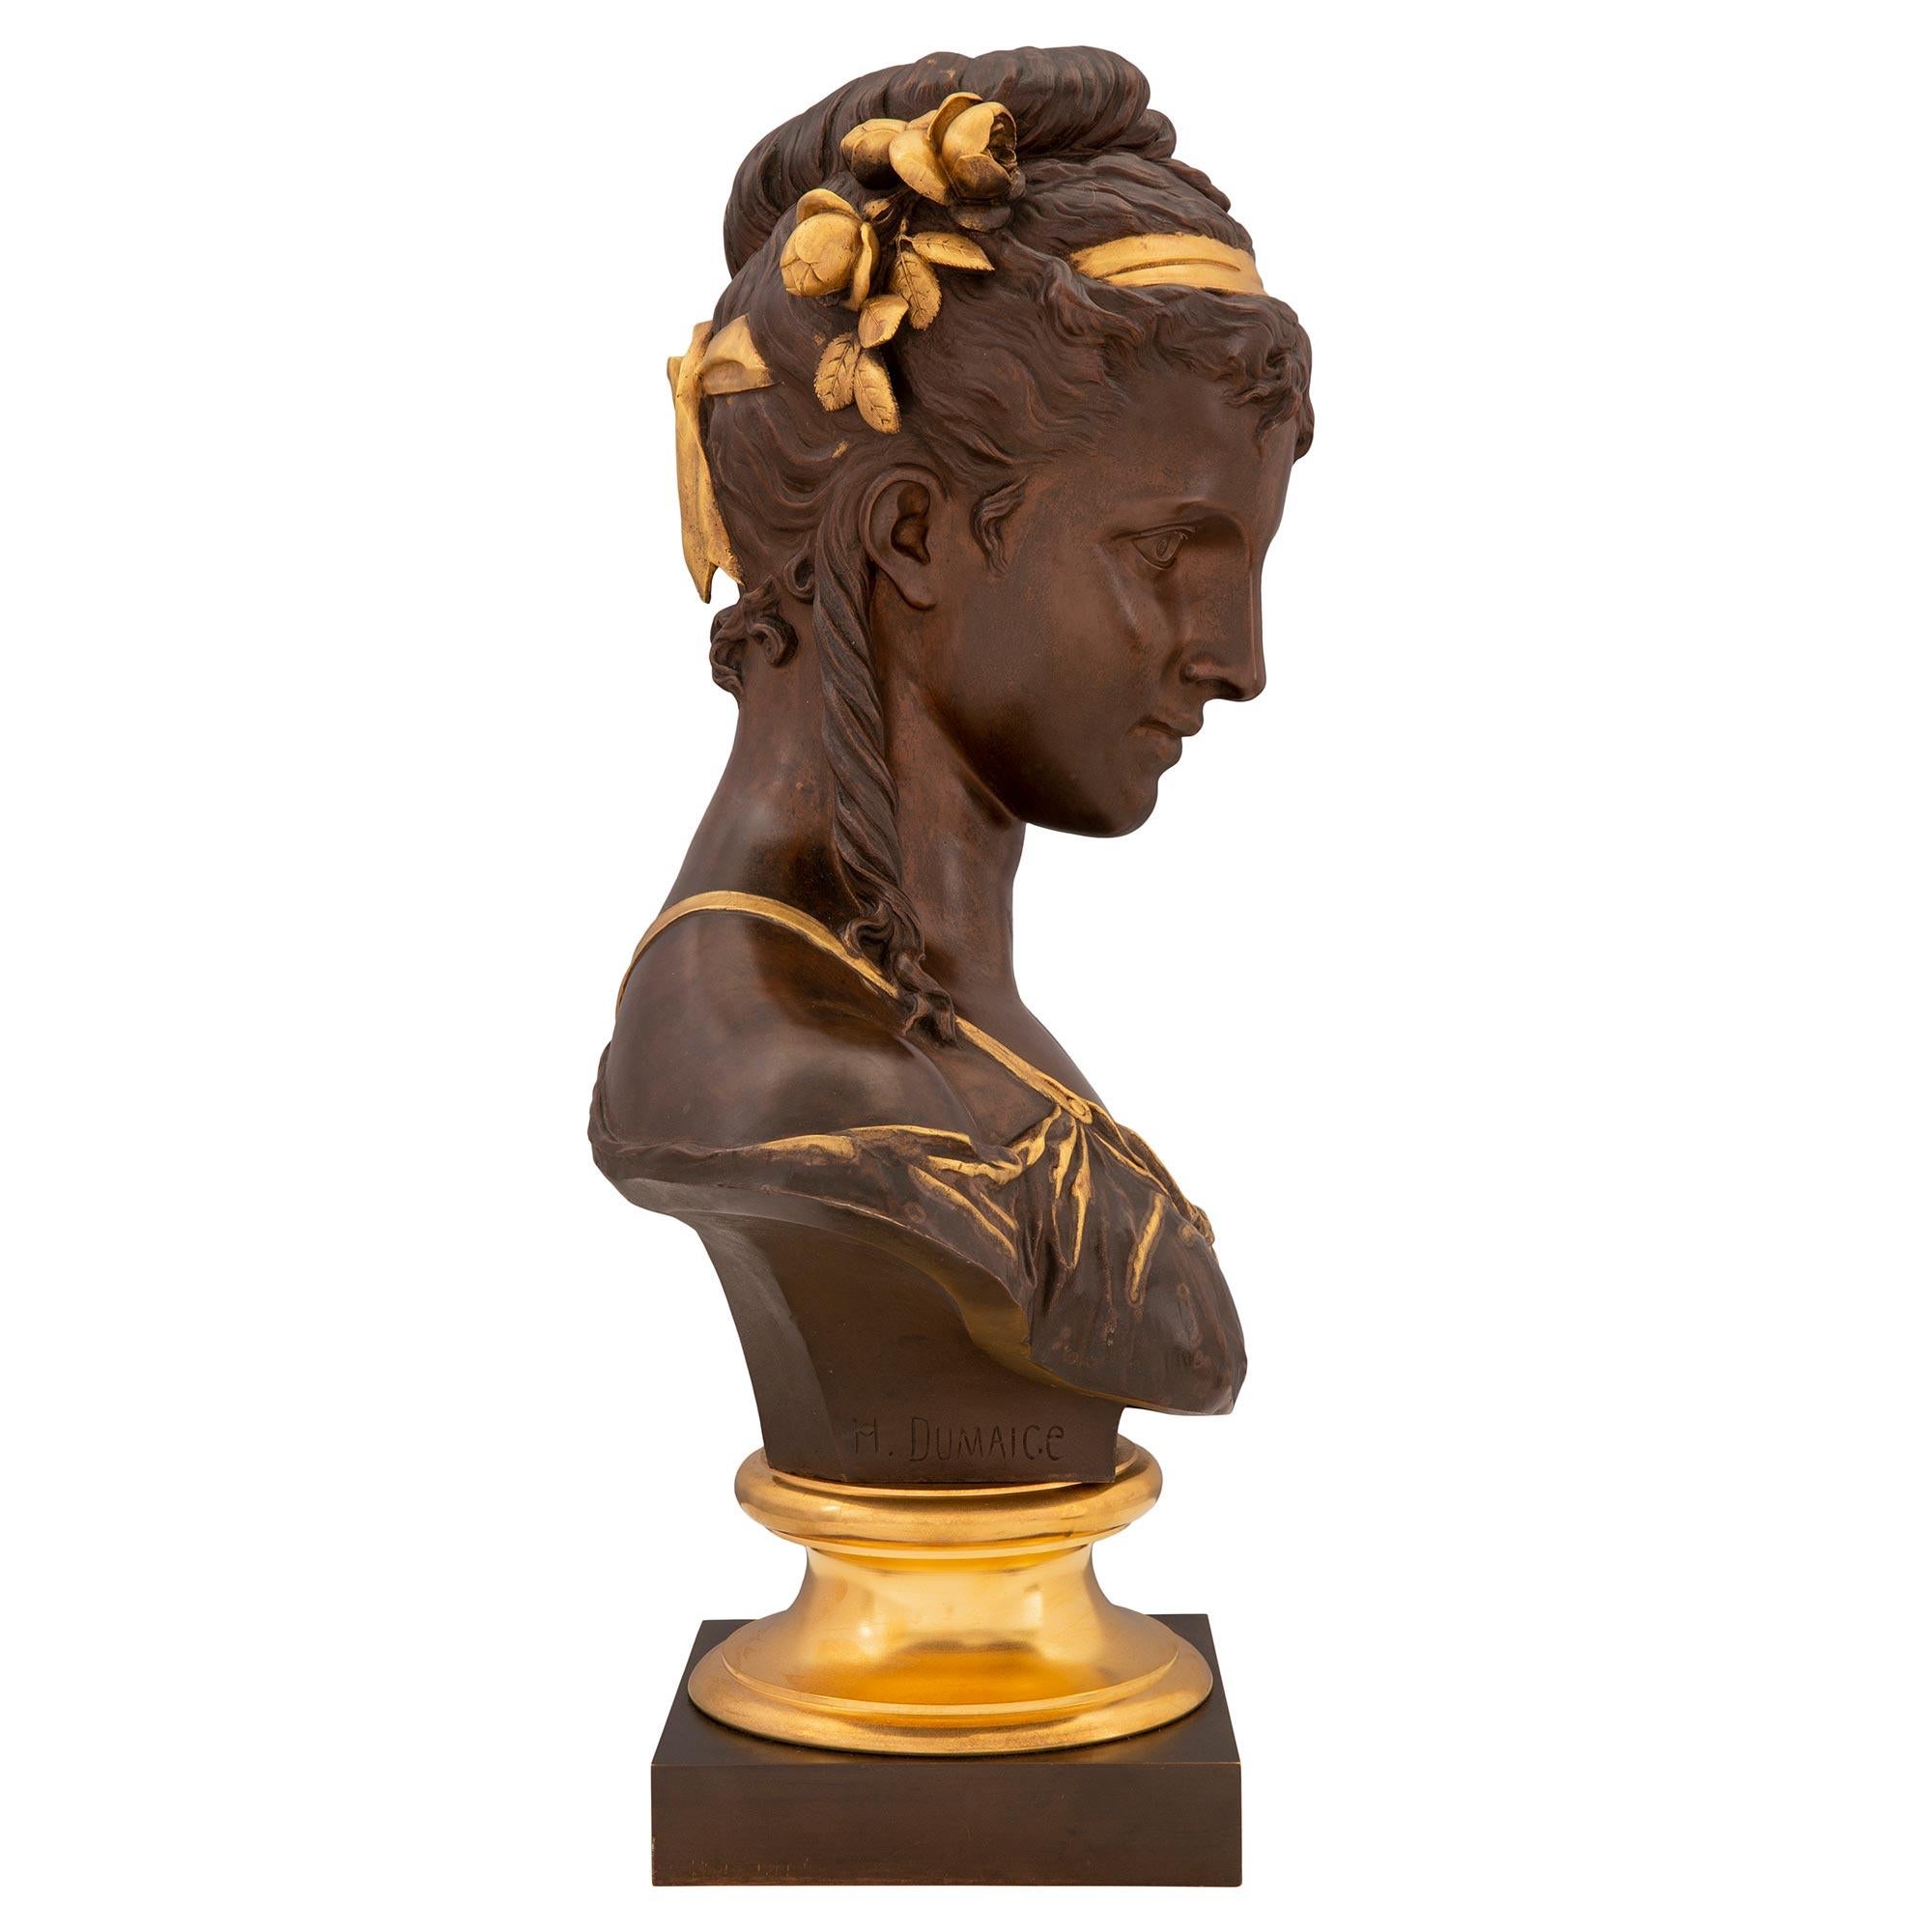 Patinated French 19th Century Louis XVI Style Bronze and Ormolu Bust, Signed H. Dumaice For Sale